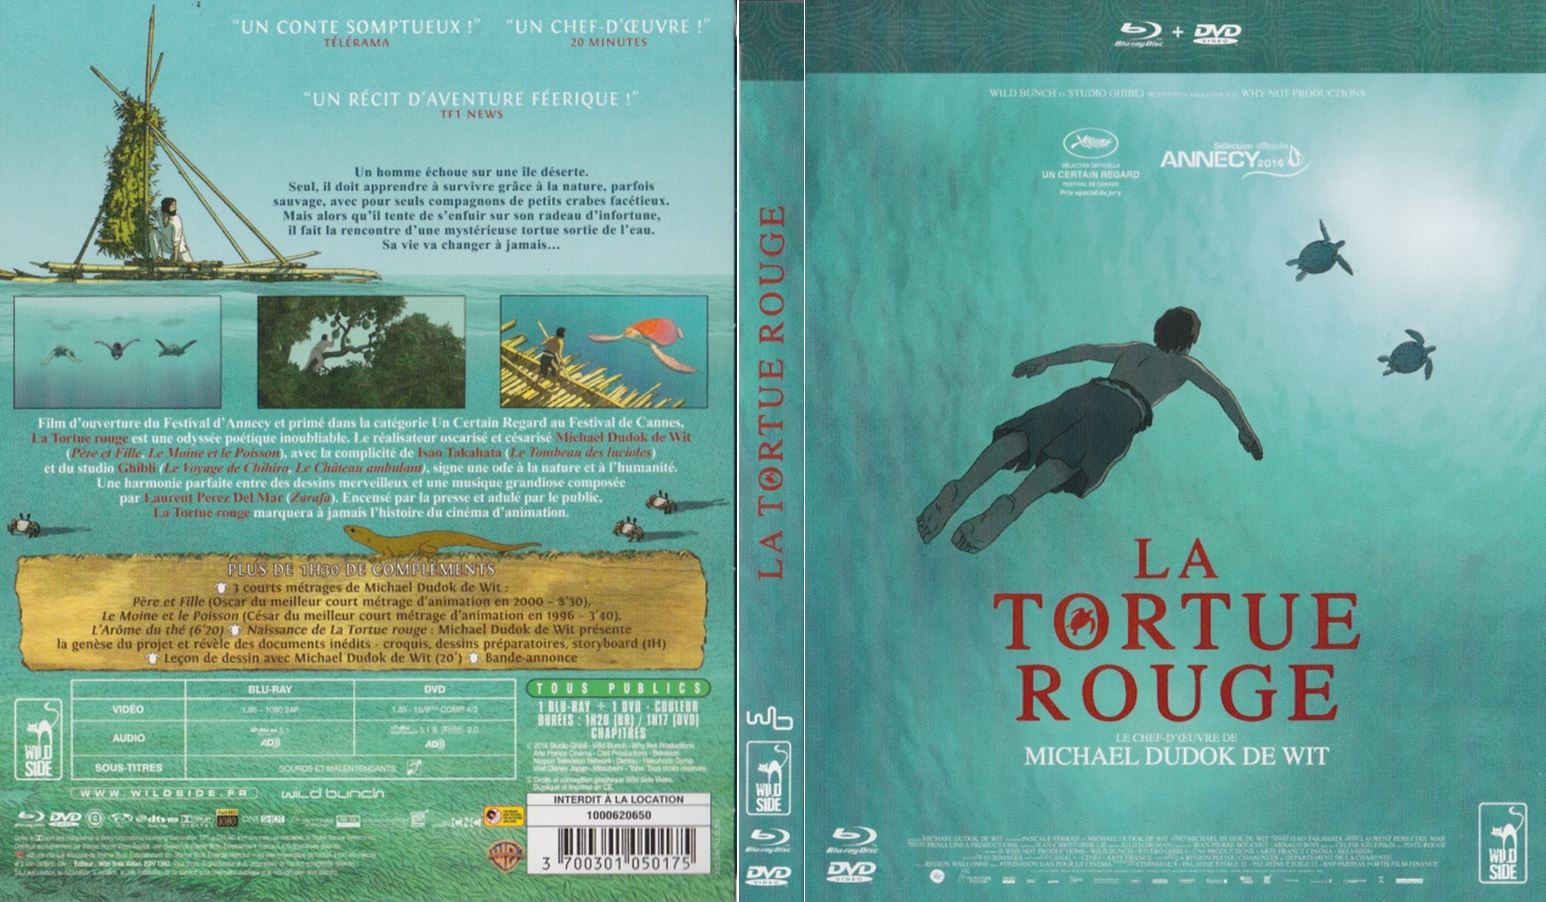 Jaquette DVD La tortue rouge (BLU-RAY)